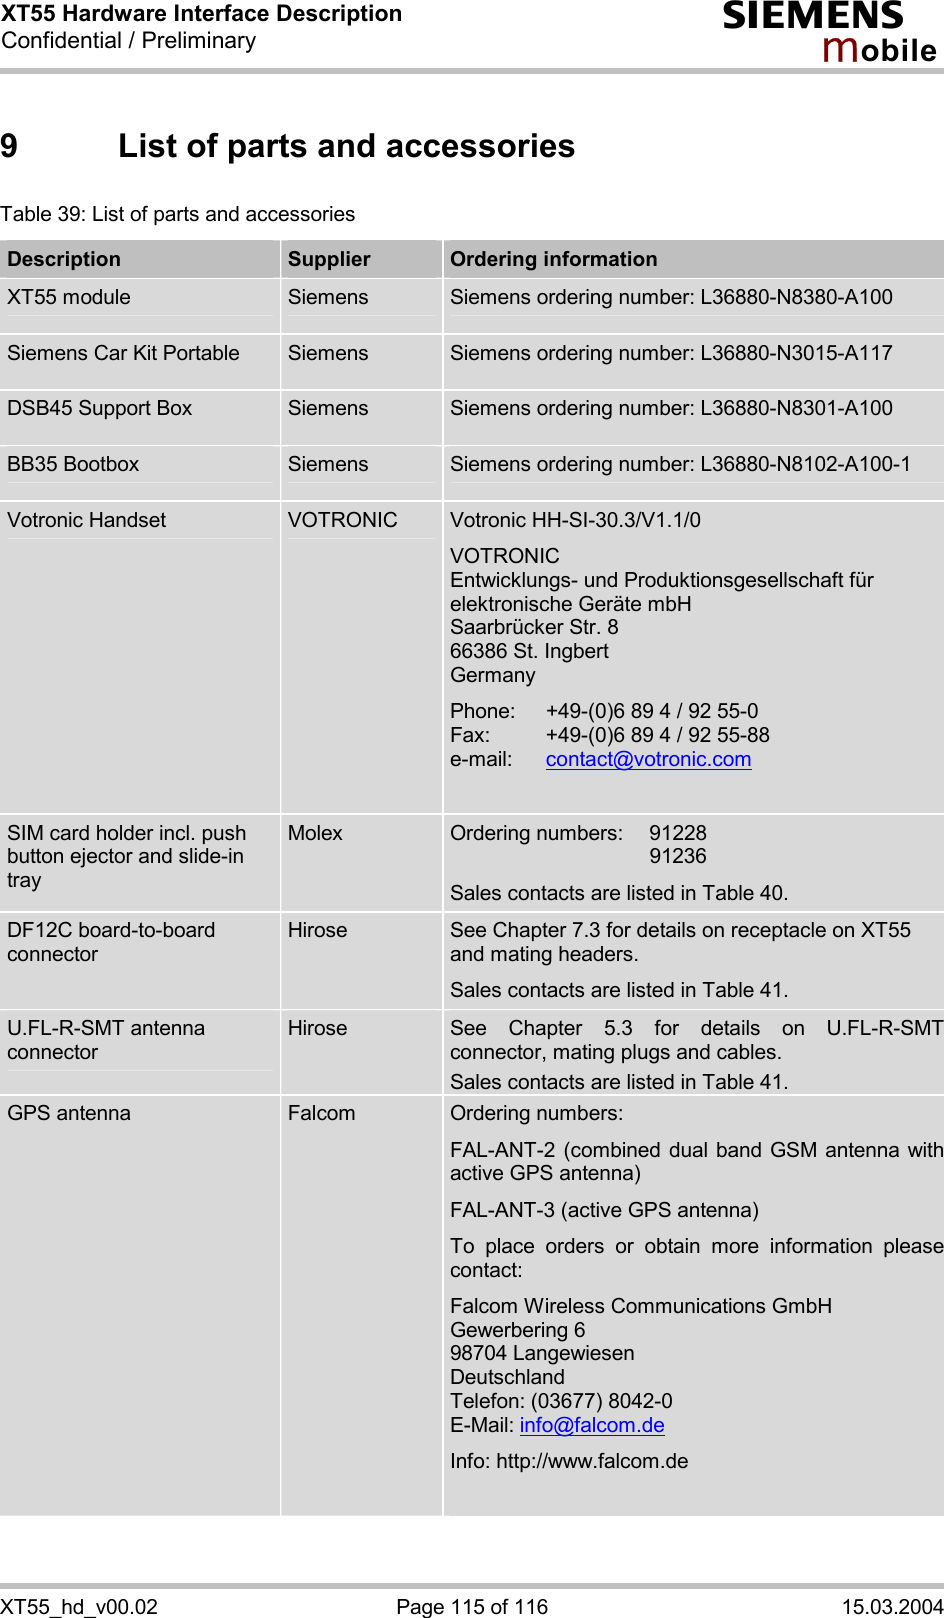 XT55 Hardware Interface Description Confidential / Preliminary s mo b i l e XT55_hd_v00.02  Page 115 of 116  15.03.2004 9  List of parts and accessories Table 39: List of parts and accessories Description  Supplier  Ordering information XT55 module  Siemens  Siemens ordering number: L36880-N8380-A100 Siemens Car Kit Portable  Siemens  Siemens ordering number: L36880-N3015-A117 DSB45 Support Box  Siemens  Siemens ordering number: L36880-N8301-A100 BB35 Bootbox   Siemens  Siemens ordering number: L36880-N8102-A100-1 Votronic Handset  VOTRONIC  Votronic HH-SI-30.3/V1.1/0 VOTRONIC  Entwicklungs- und Produktionsgesellschaft für elektronische Geräte mbH Saarbrücker Str. 8 66386 St. Ingbert Germany Phone:   +49-(0)6 89 4 / 92 55-0 Fax:   +49-(0)6 89 4 / 92 55-88 e-mail:   contact@votronic.com  SIM card holder incl. push button ejector and slide-in tray Molex  Ordering numbers:  91228   91236 Sales contacts are listed in Table 40. DF12C board-to-board connector  Hirose  See Chapter 7.3 for details on receptacle on XT55 and mating headers. Sales contacts are listed in Table 41. U.FL-R-SMT antenna connector Hirose  See Chapter 5.3 for details on U.FL-R-SMT connector, mating plugs and cables. Sales contacts are listed in Table 41. GPS antenna  Falcom  Ordering numbers: FAL-ANT-2 (combined dual band GSM antenna with active GPS antenna) FAL-ANT-3 (active GPS antenna) To place orders or obtain more information please contact: Falcom Wireless Communications GmbH Gewerbering 6 98704 Langewiesen Deutschland Telefon: (03677) 8042-0 E-Mail: info@falcom.de Info: http://www.falcom.de   